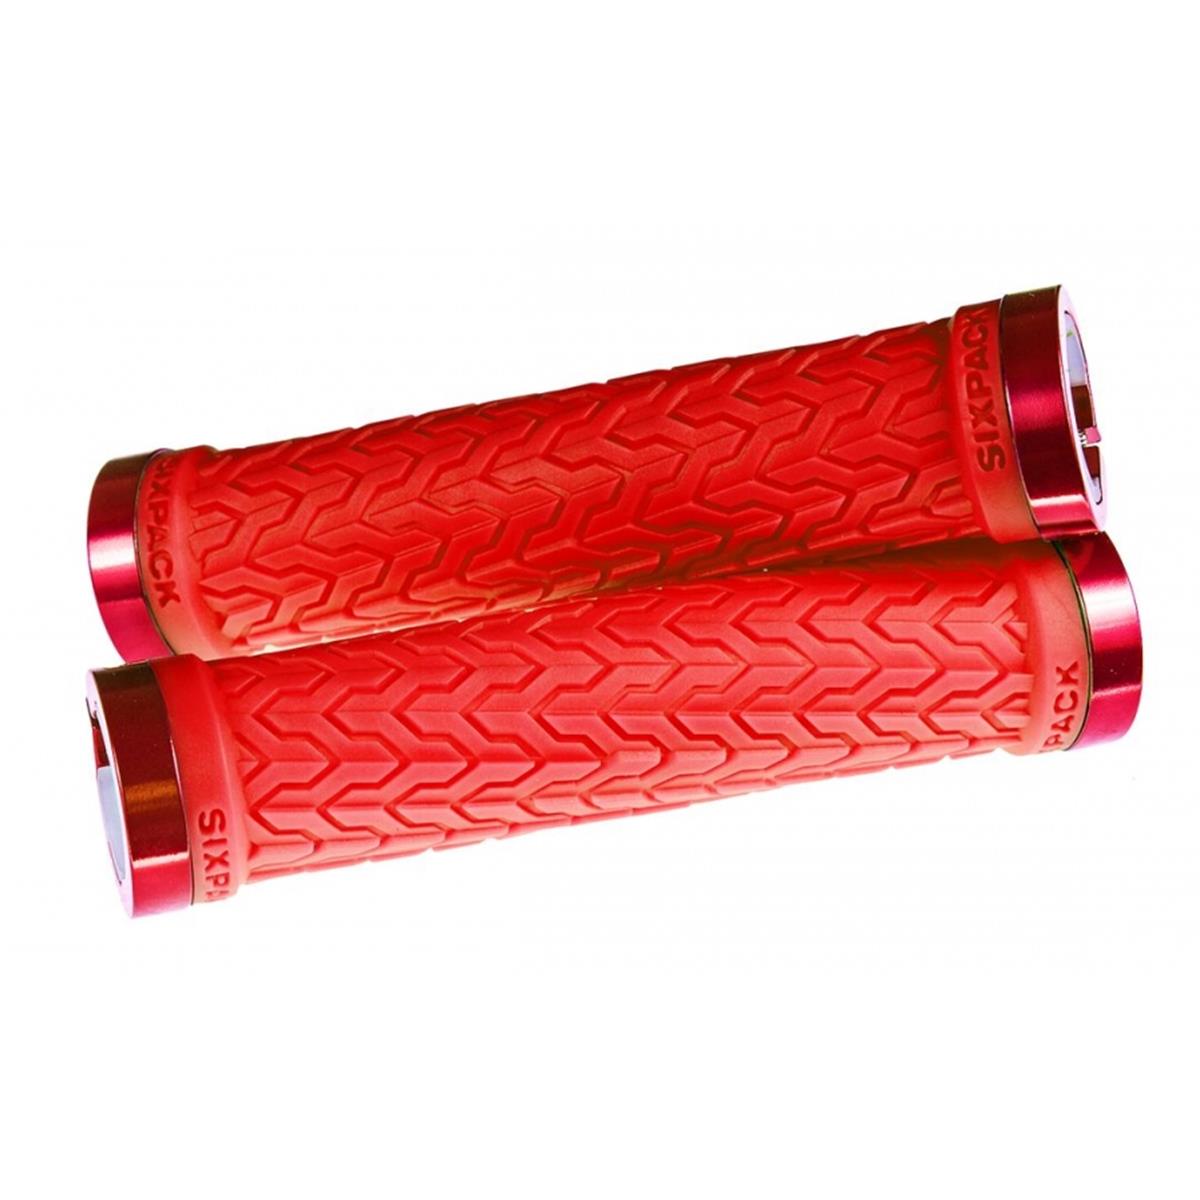 Sixpack Grips VTT S-Trix Red/Red, Lock On System, 125 mm Length